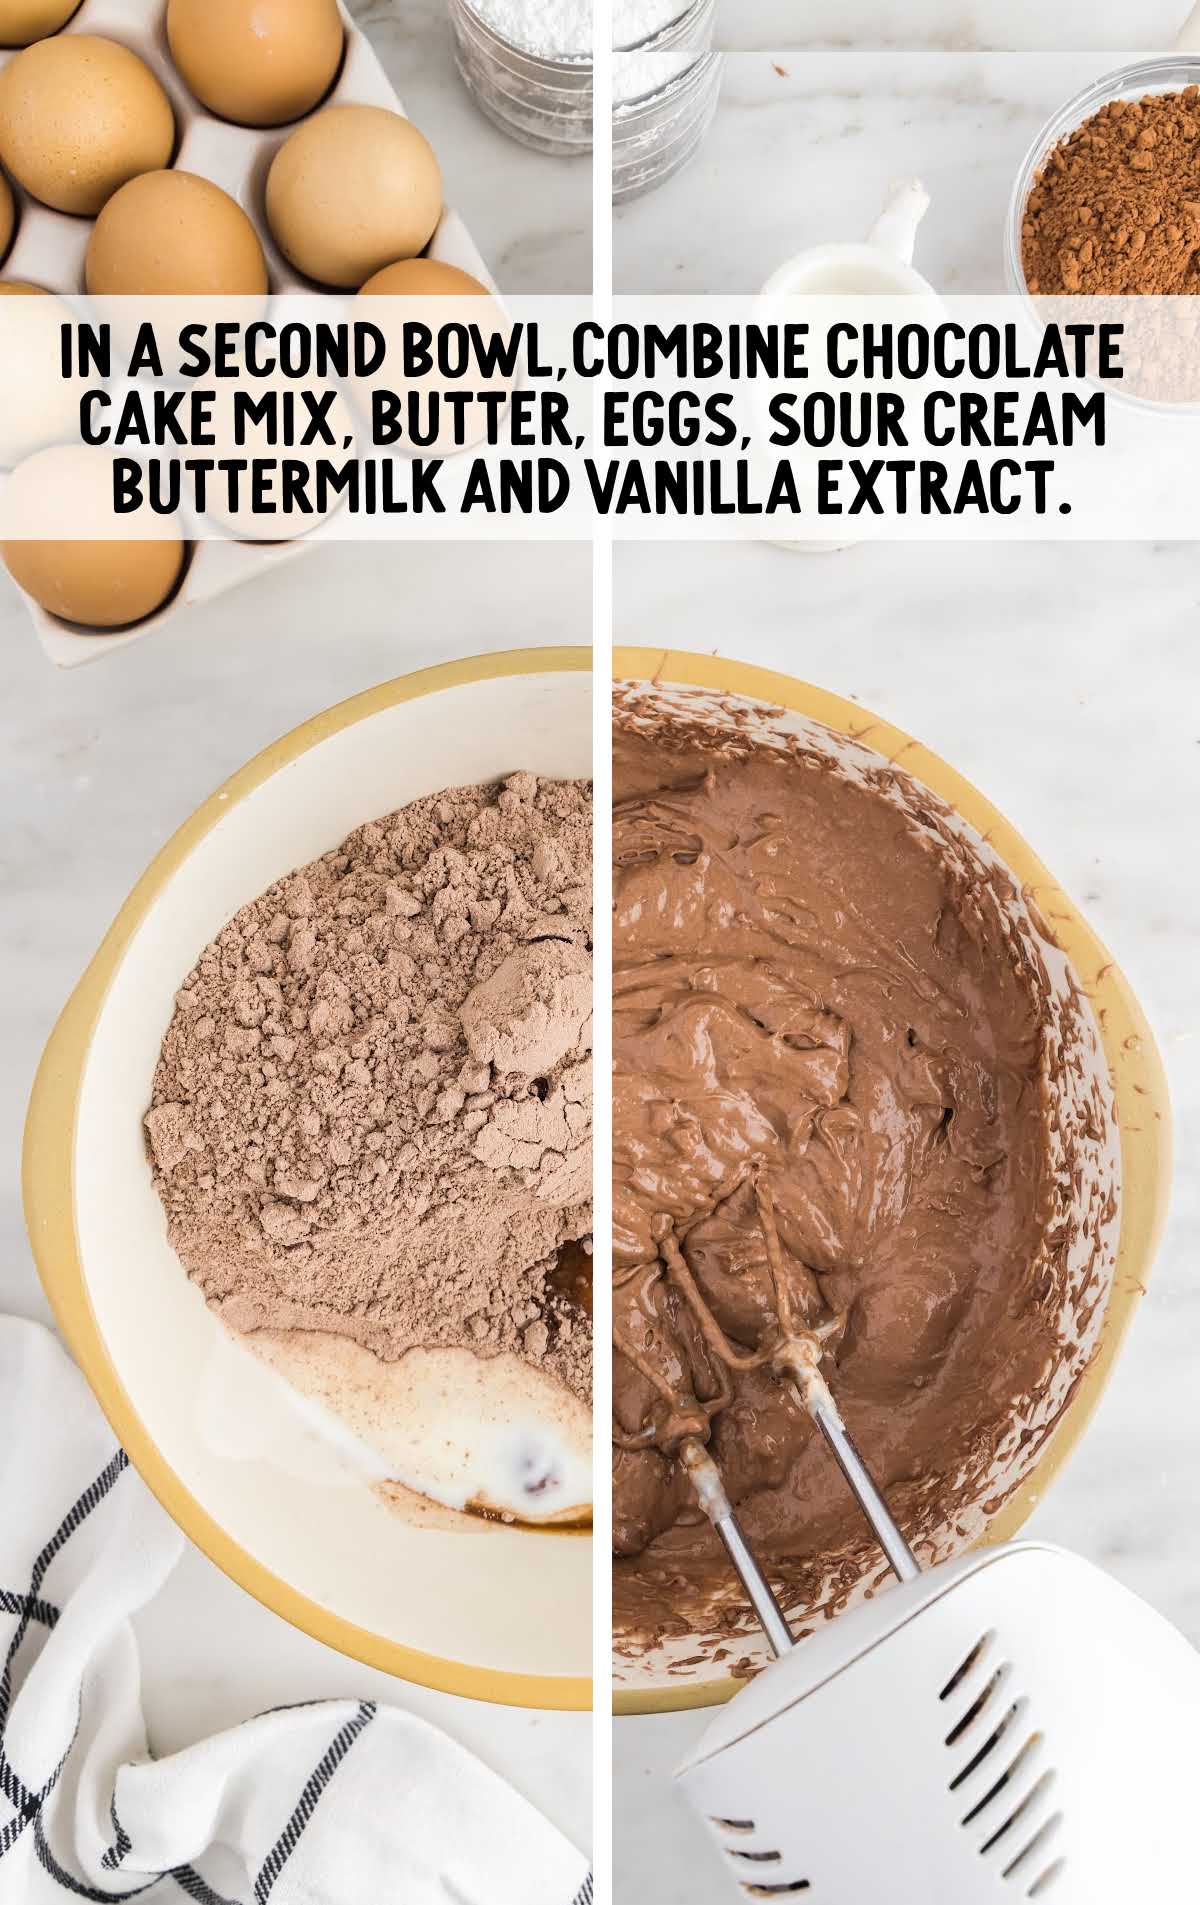 chocolate cake mix, butter, eggs, sour cream, buttermilk, and vanilla extract combined in a different bowl